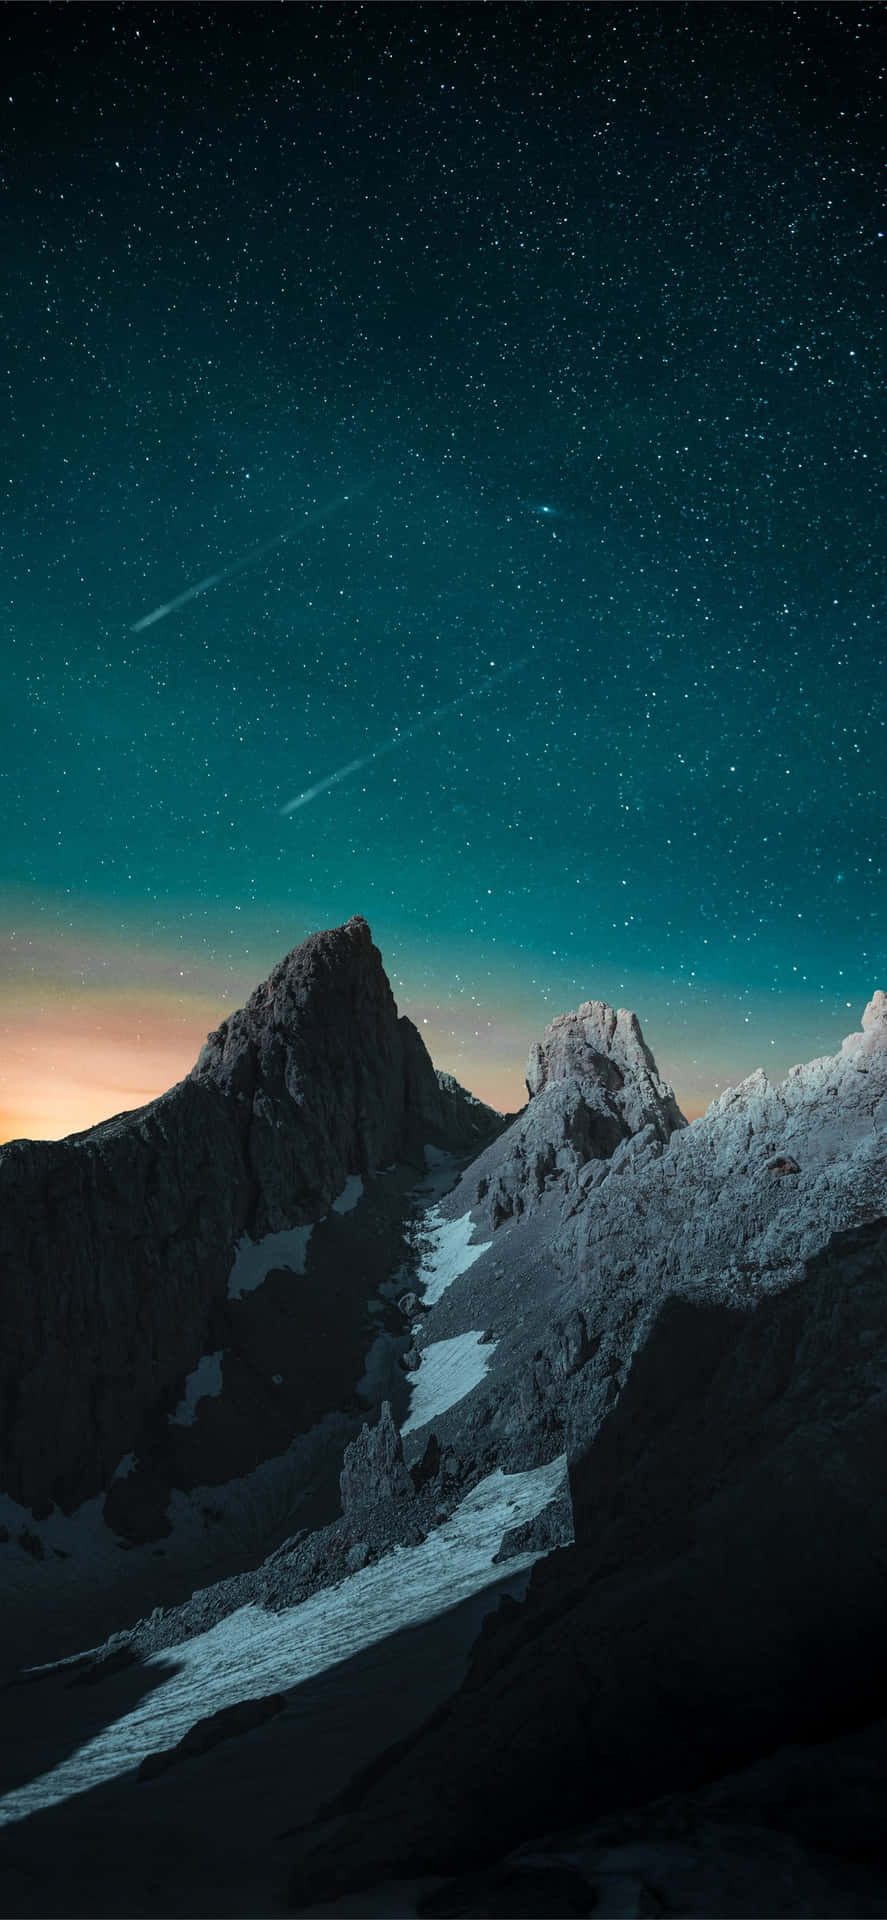 Mountains With Shooting Stars In Evening Sky Wallpaper